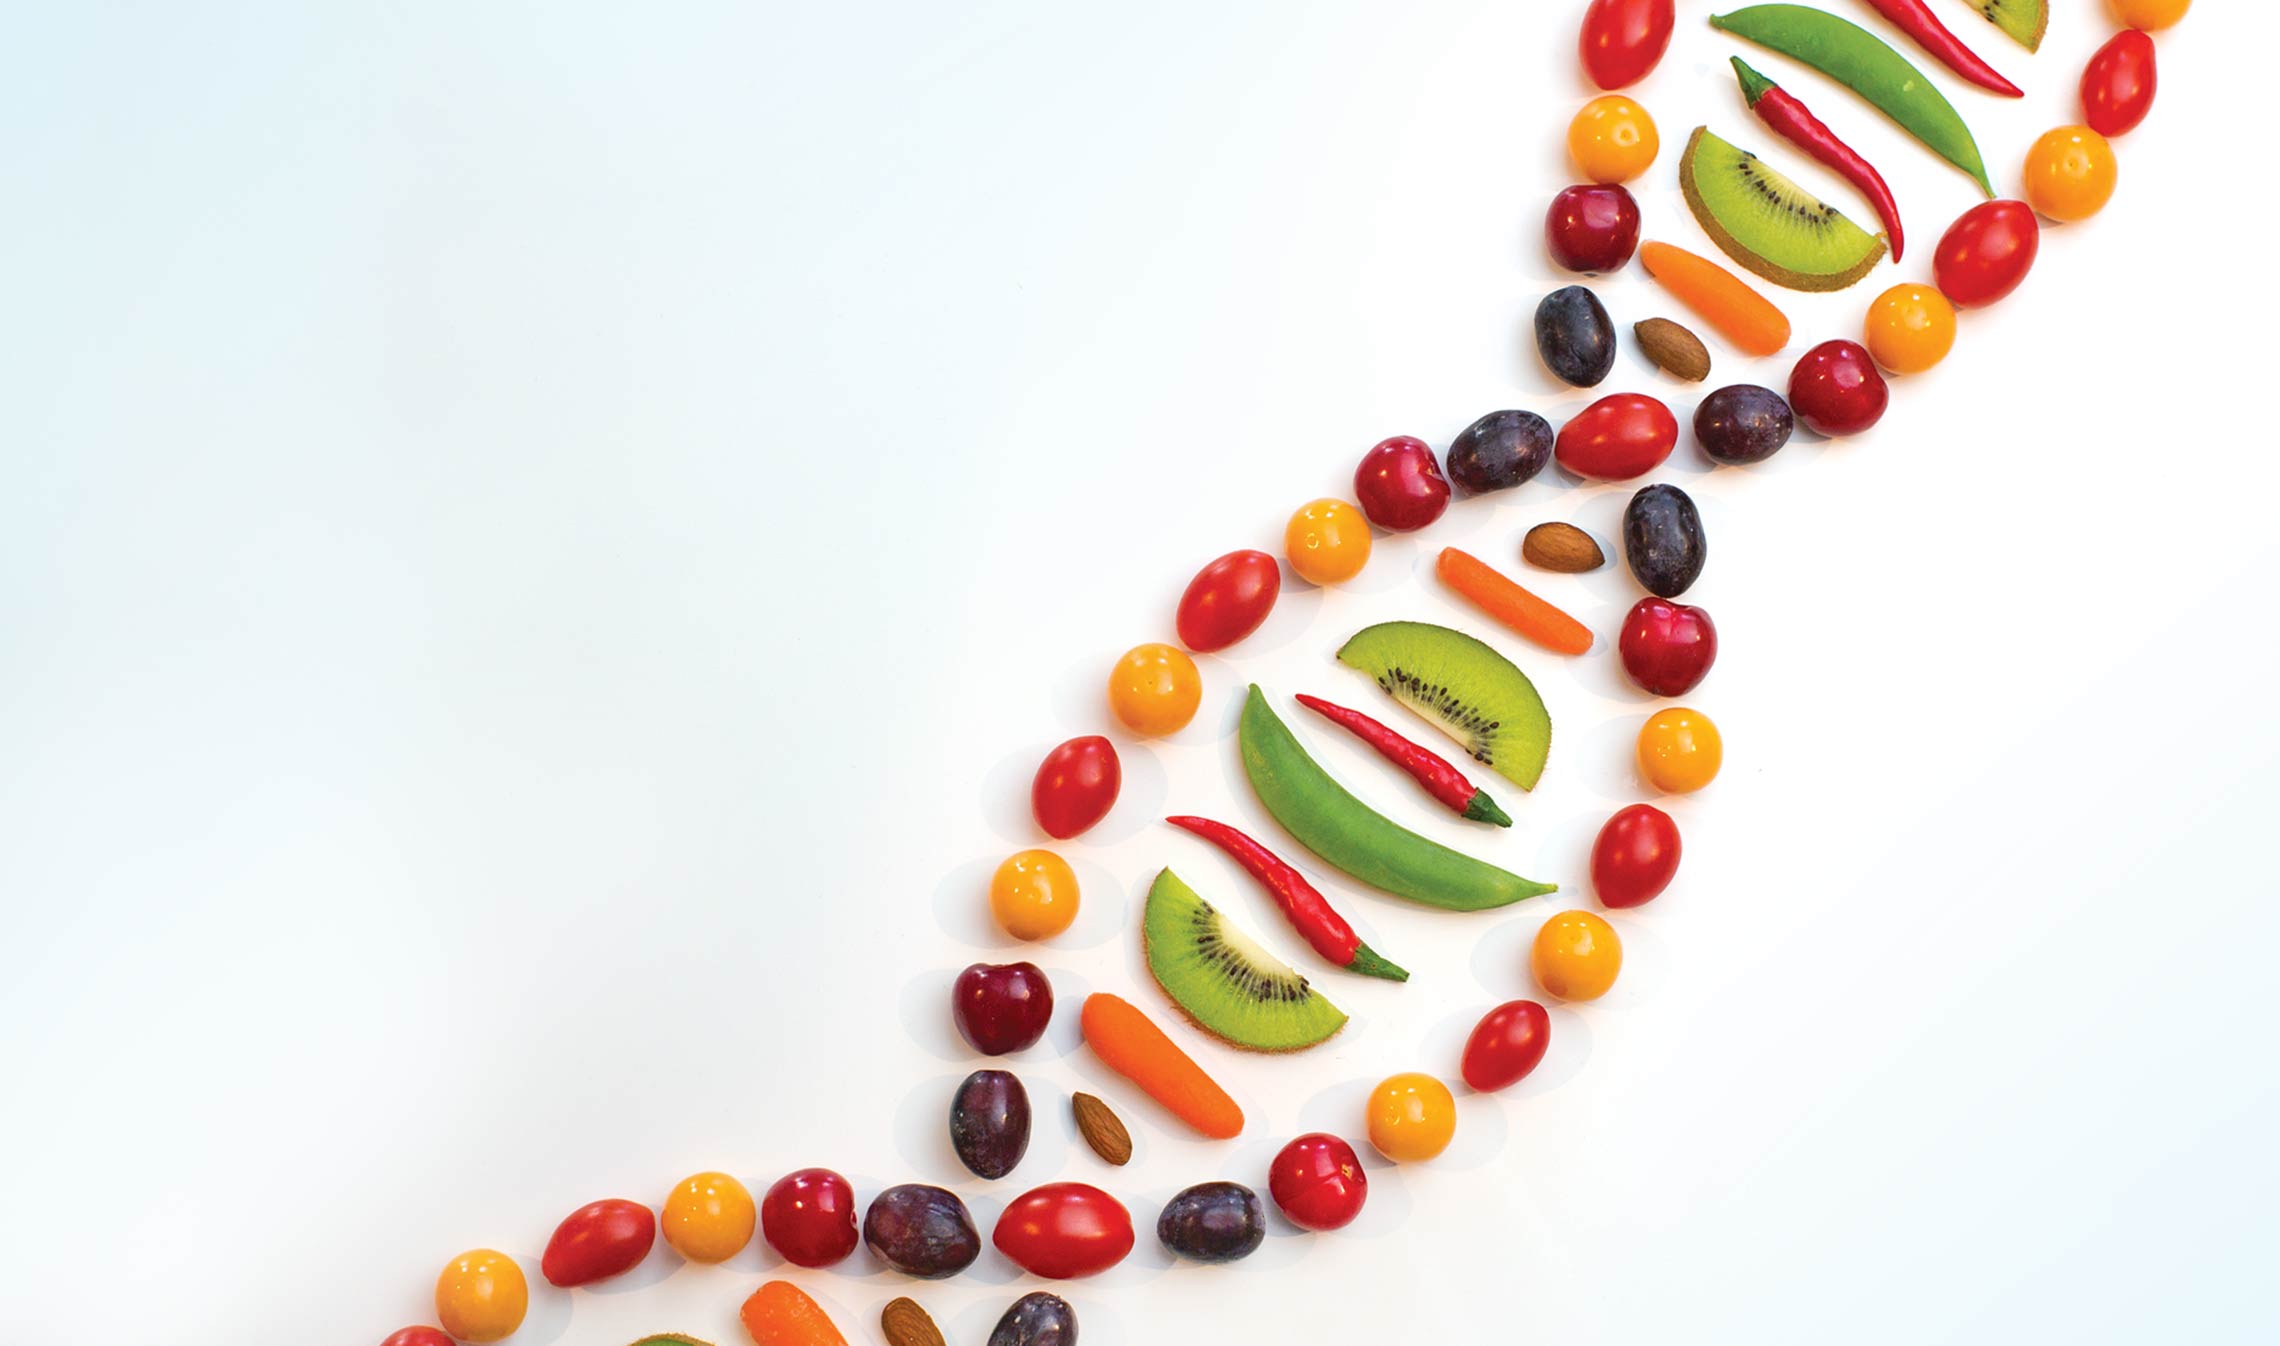 A gene helix made up of various foods.